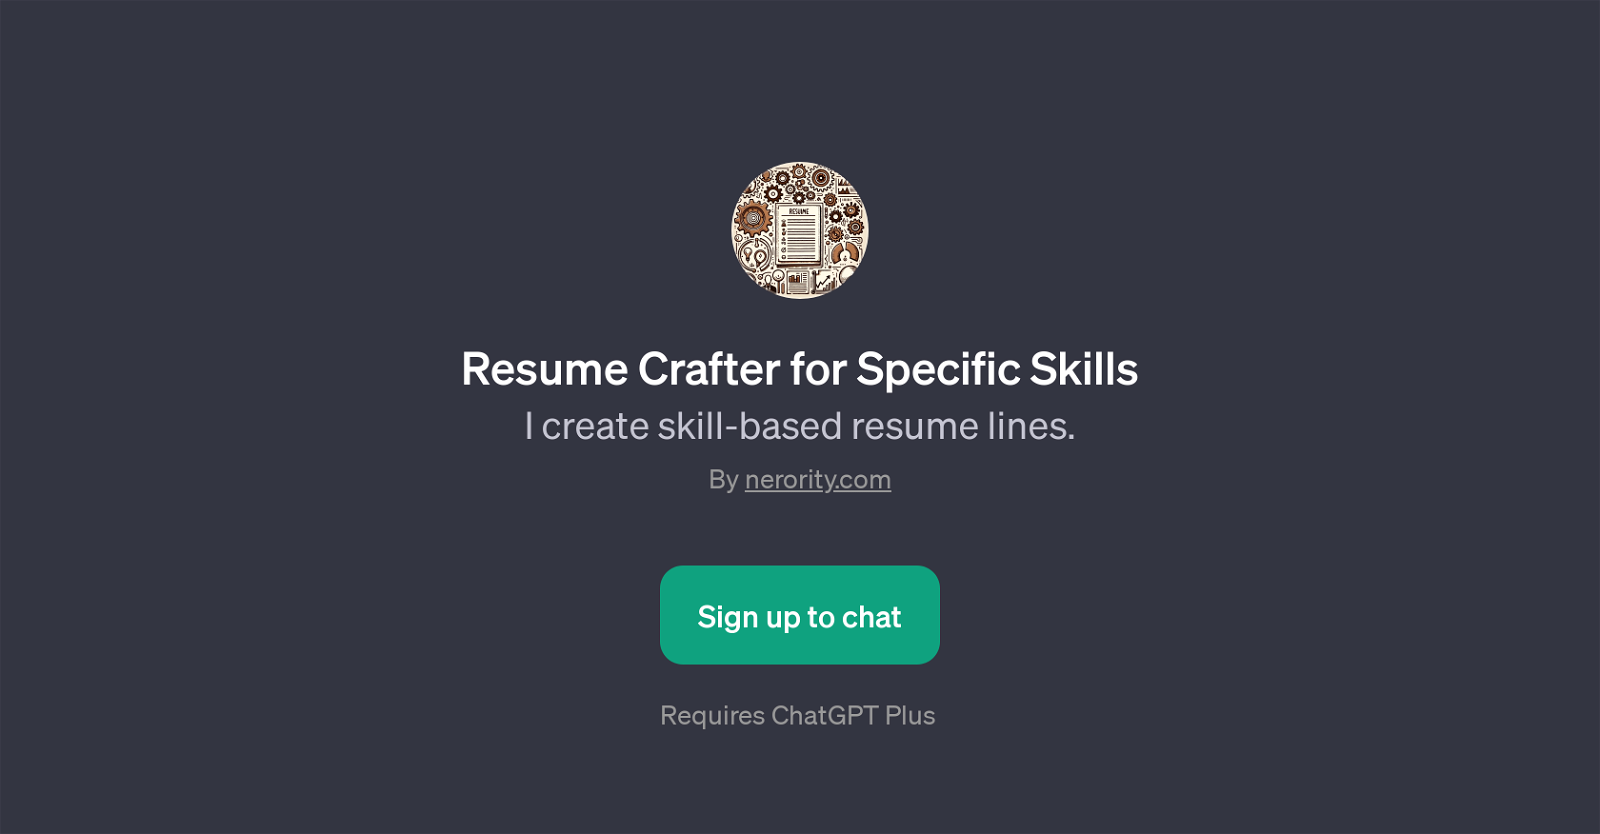 Resume Crafter for Specific Skills website